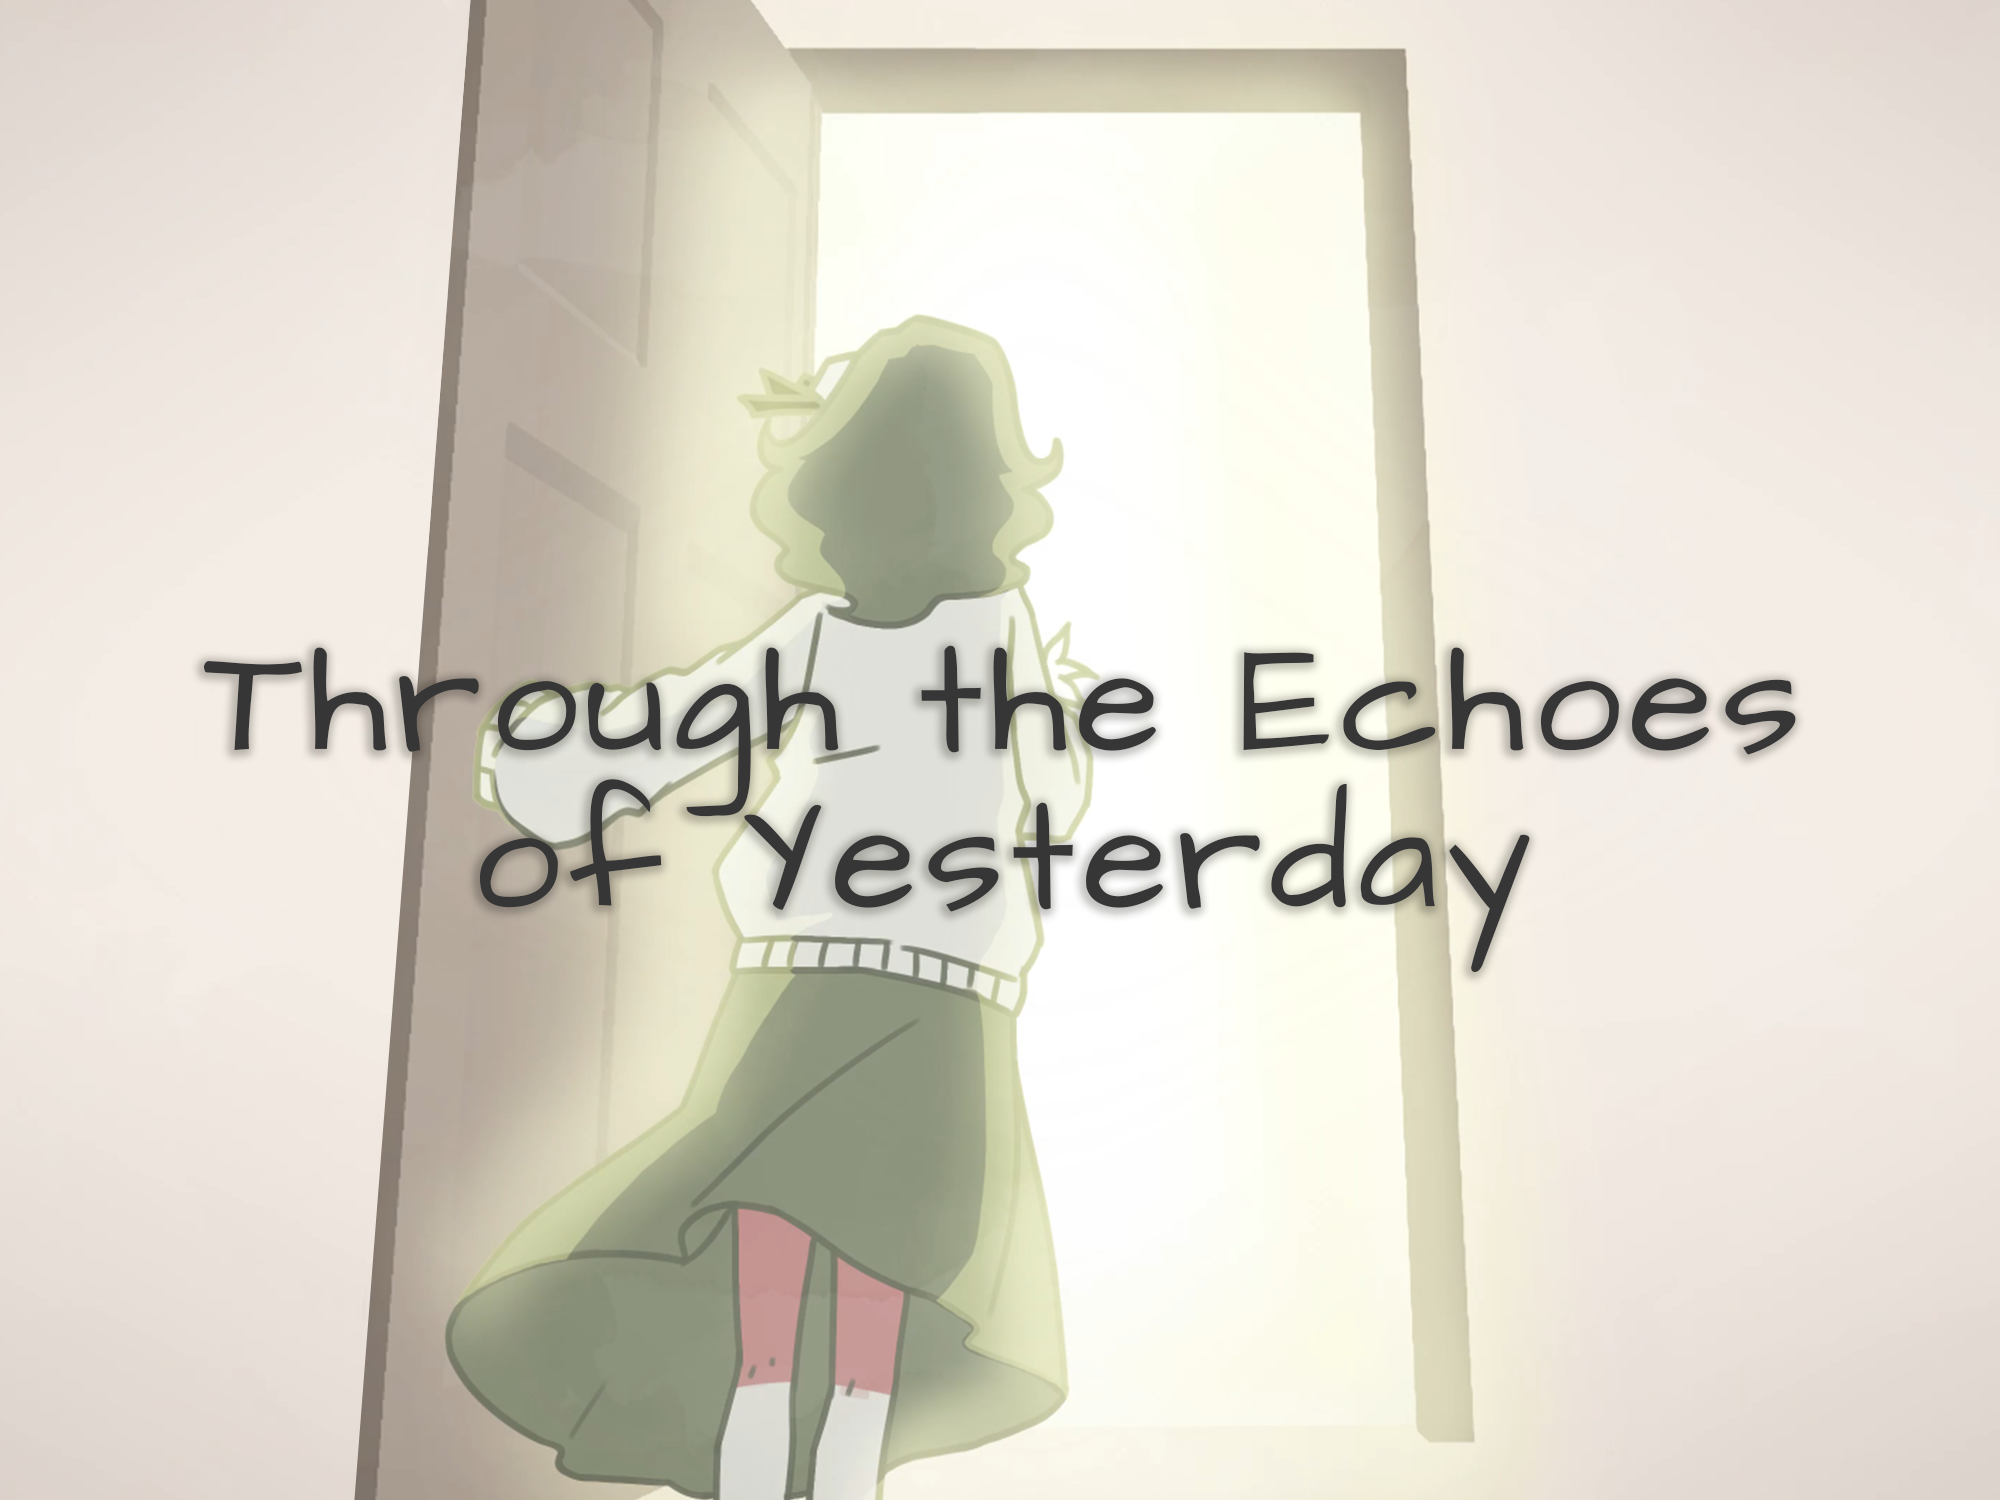 Through the Echoes of Yesterday